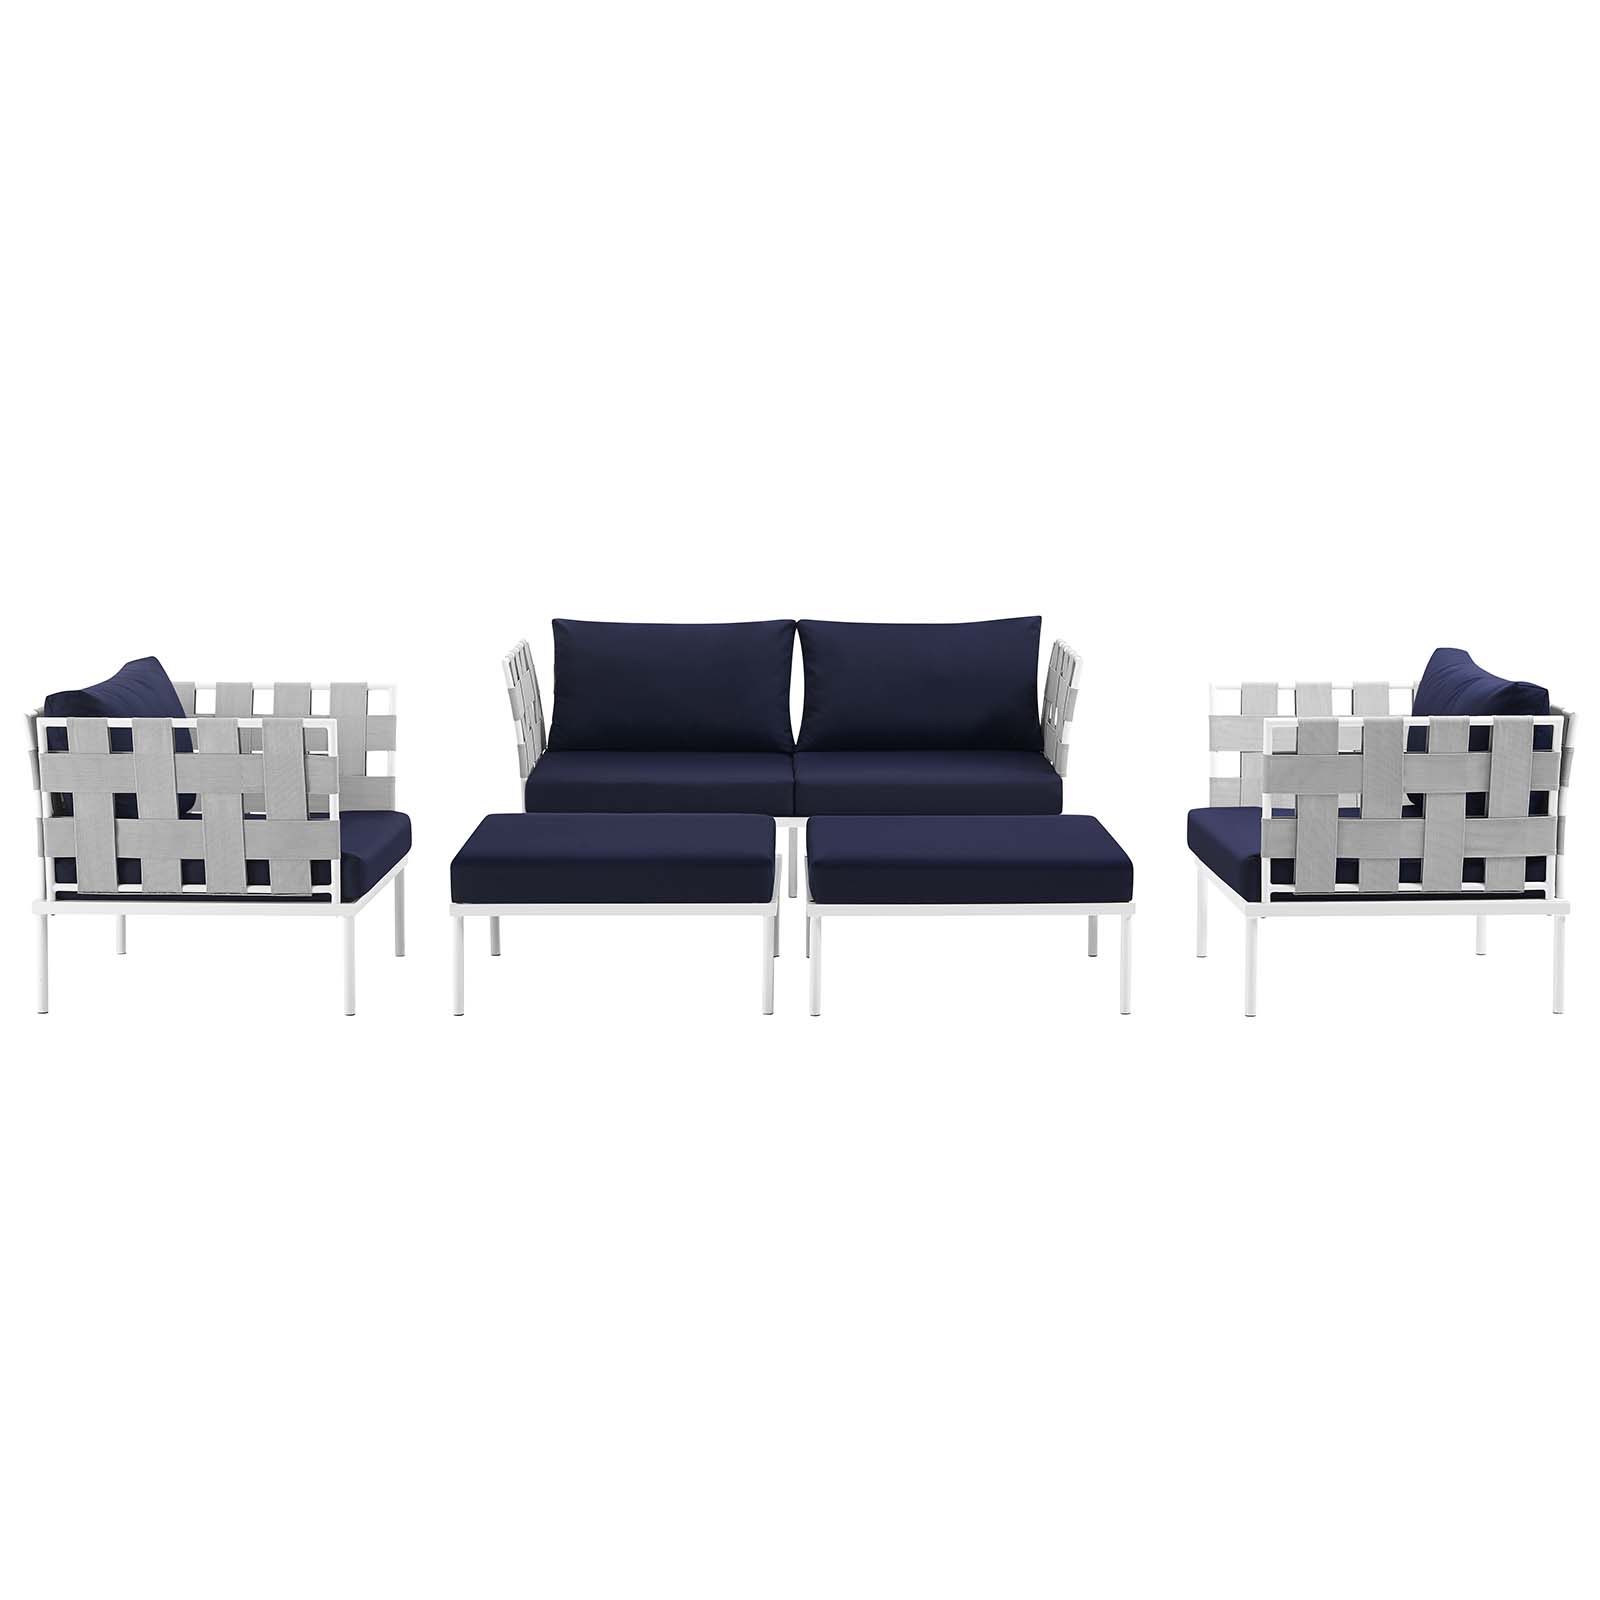 Modway Harmony 5 Piece Outdoor Patio Aluminum Sectional Sofa Set in White Navy - image 4 of 7